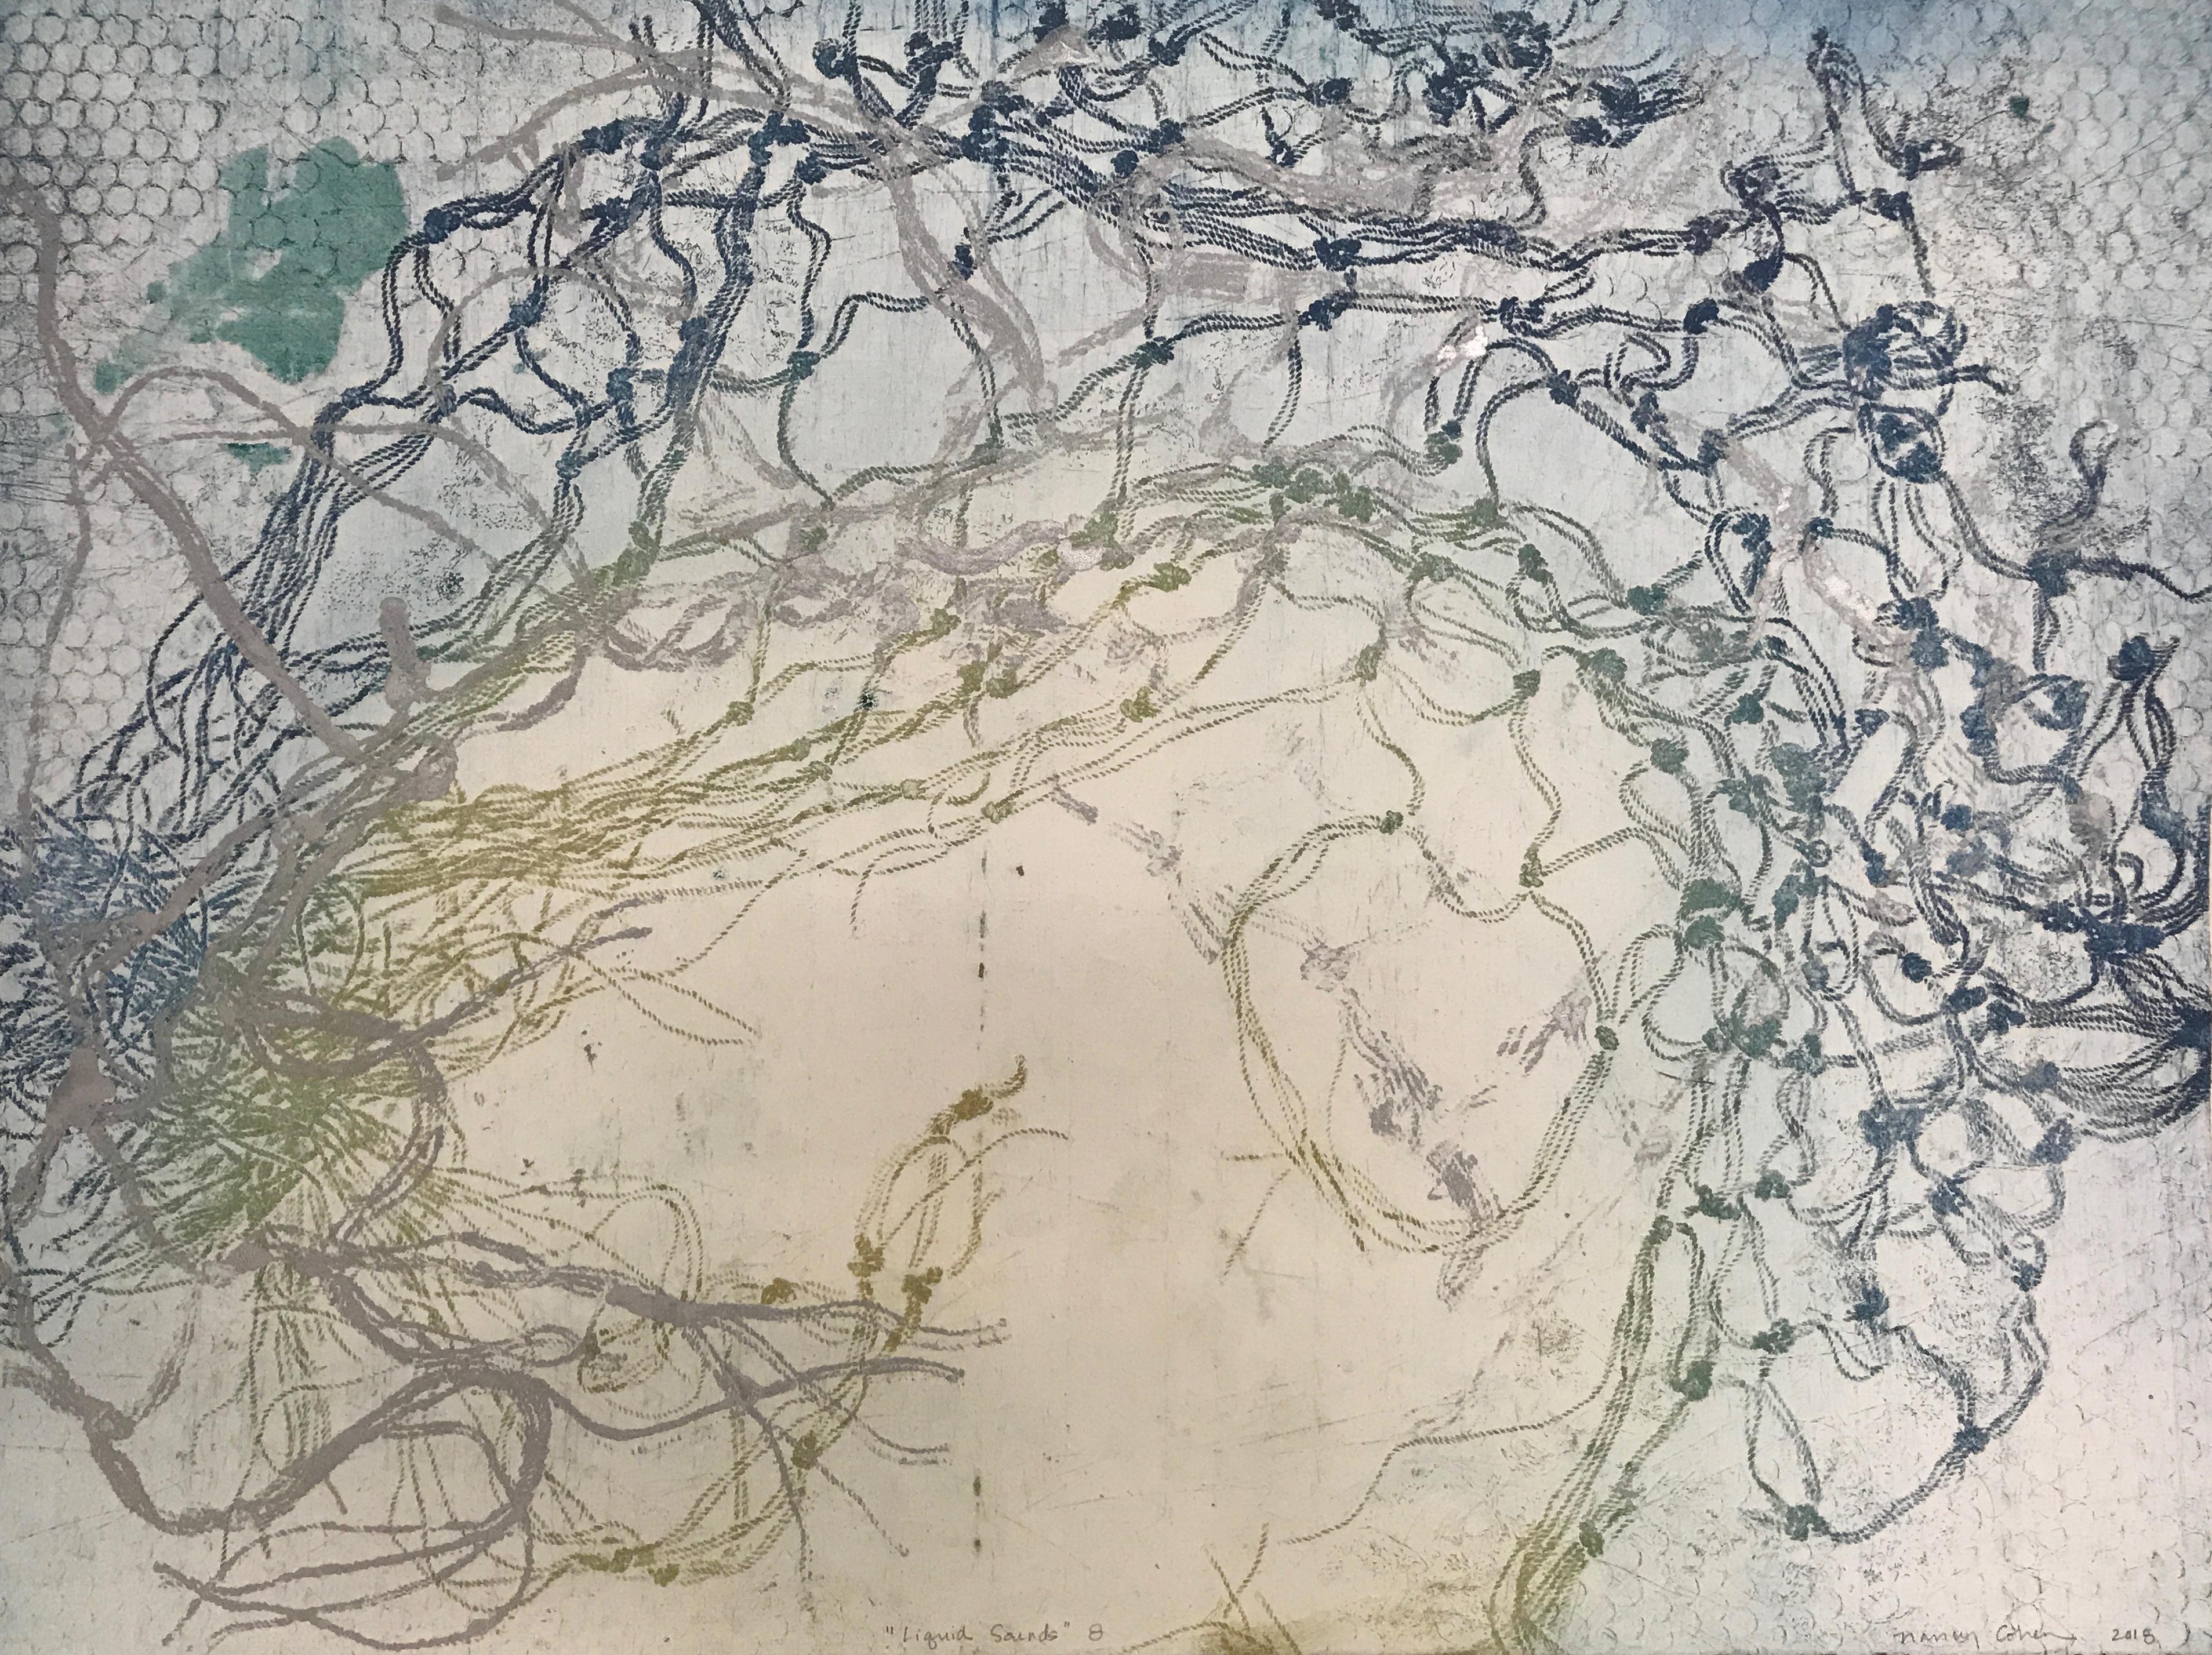 Nancy Cohen Abstract Print - "Liquid Sound 12" abstract waterscape monoprint, silver, gold, turquoise, green.